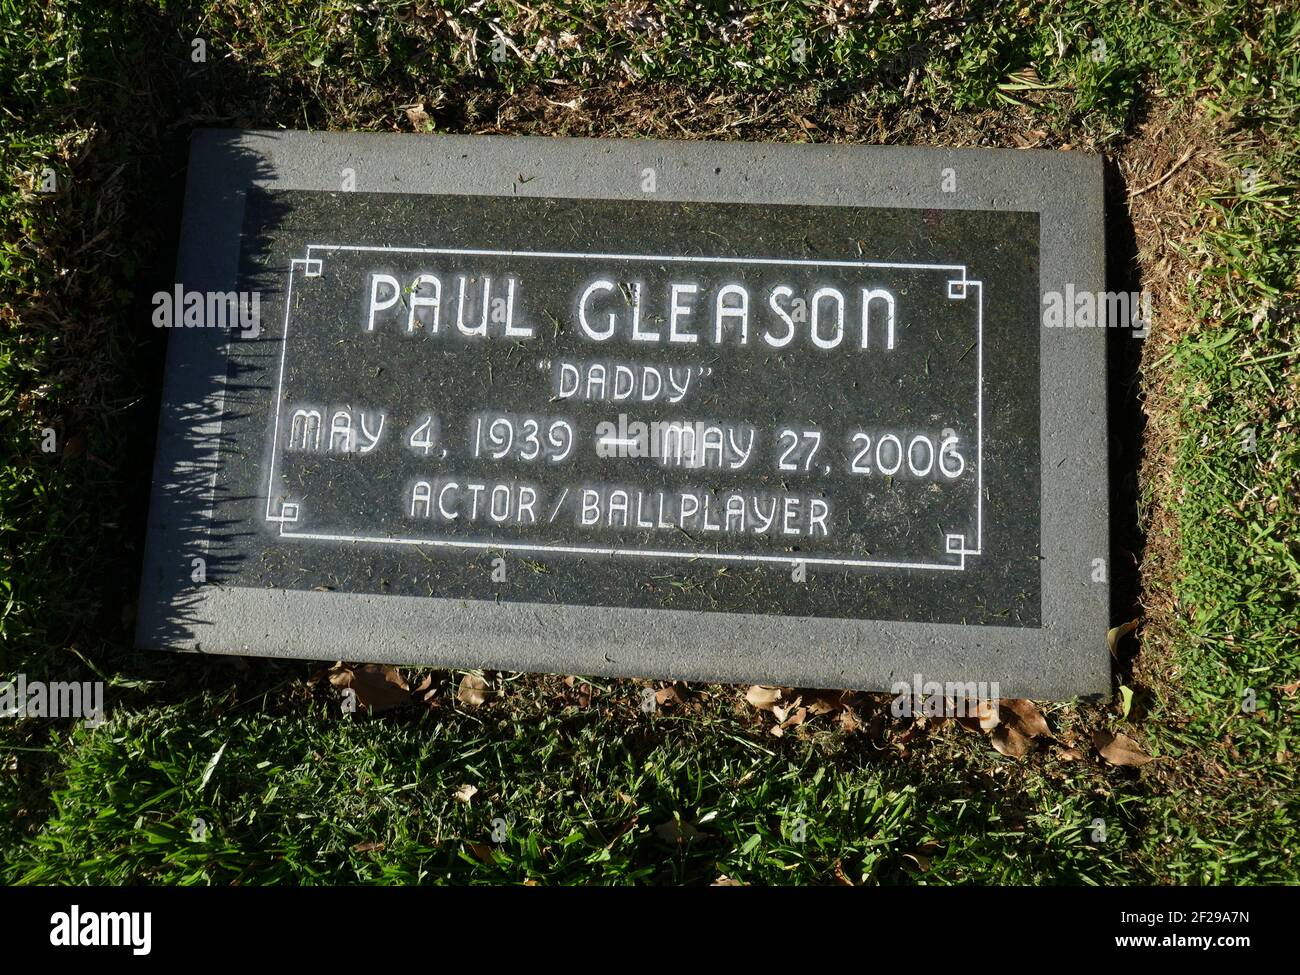 Los Angeles, California, USA 9th March 2021 A general view of atmosphere of actor Paul Gleason's grave at Pierce Brothers Westwood Village Memorial Park on March 9, 2021 in Los Angeles, California, USA. Photo by Barry King/Alamy Stock Photo Stock Photo